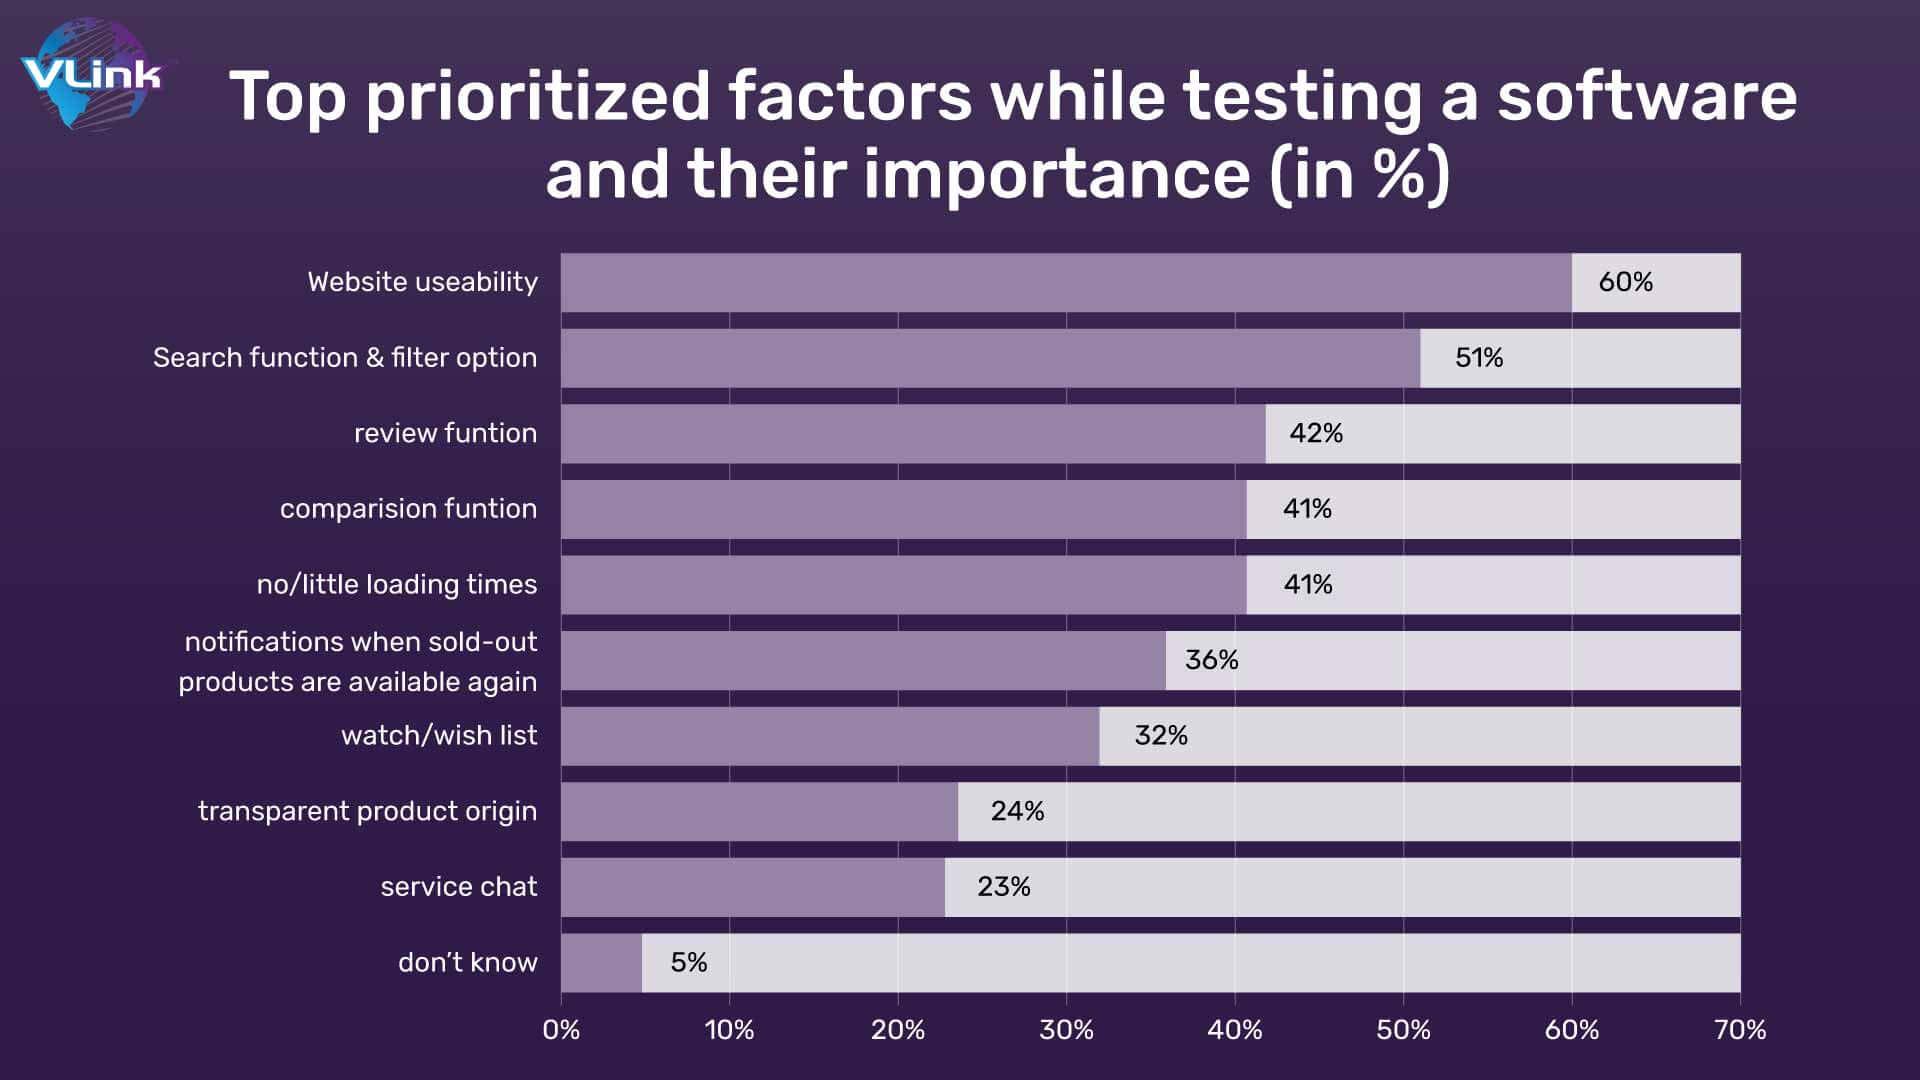 Top prioritized factors while testing a software and their importance (in %)